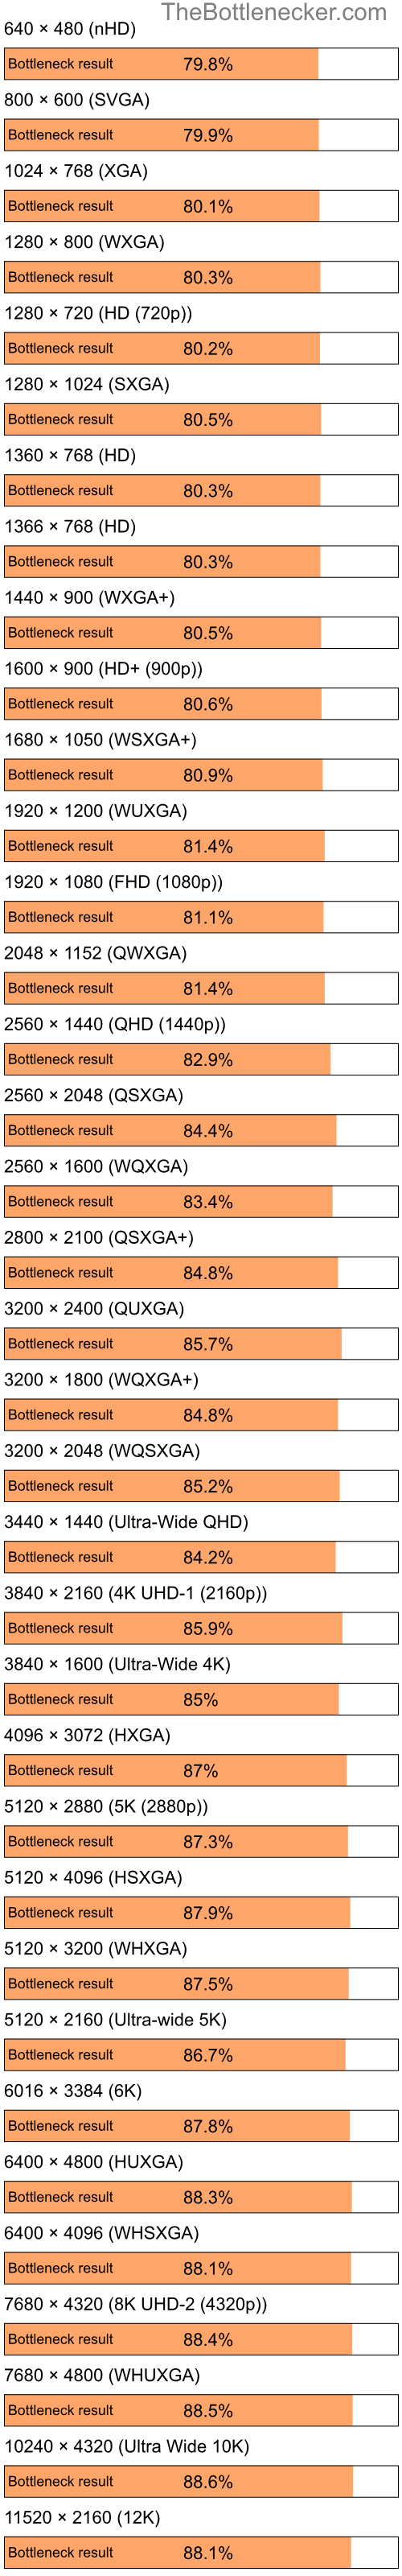 Bottleneck results by resolution for Intel Celeron M 410 and AMD Mobility Radeon X1300 in Graphic Card Intense Tasks